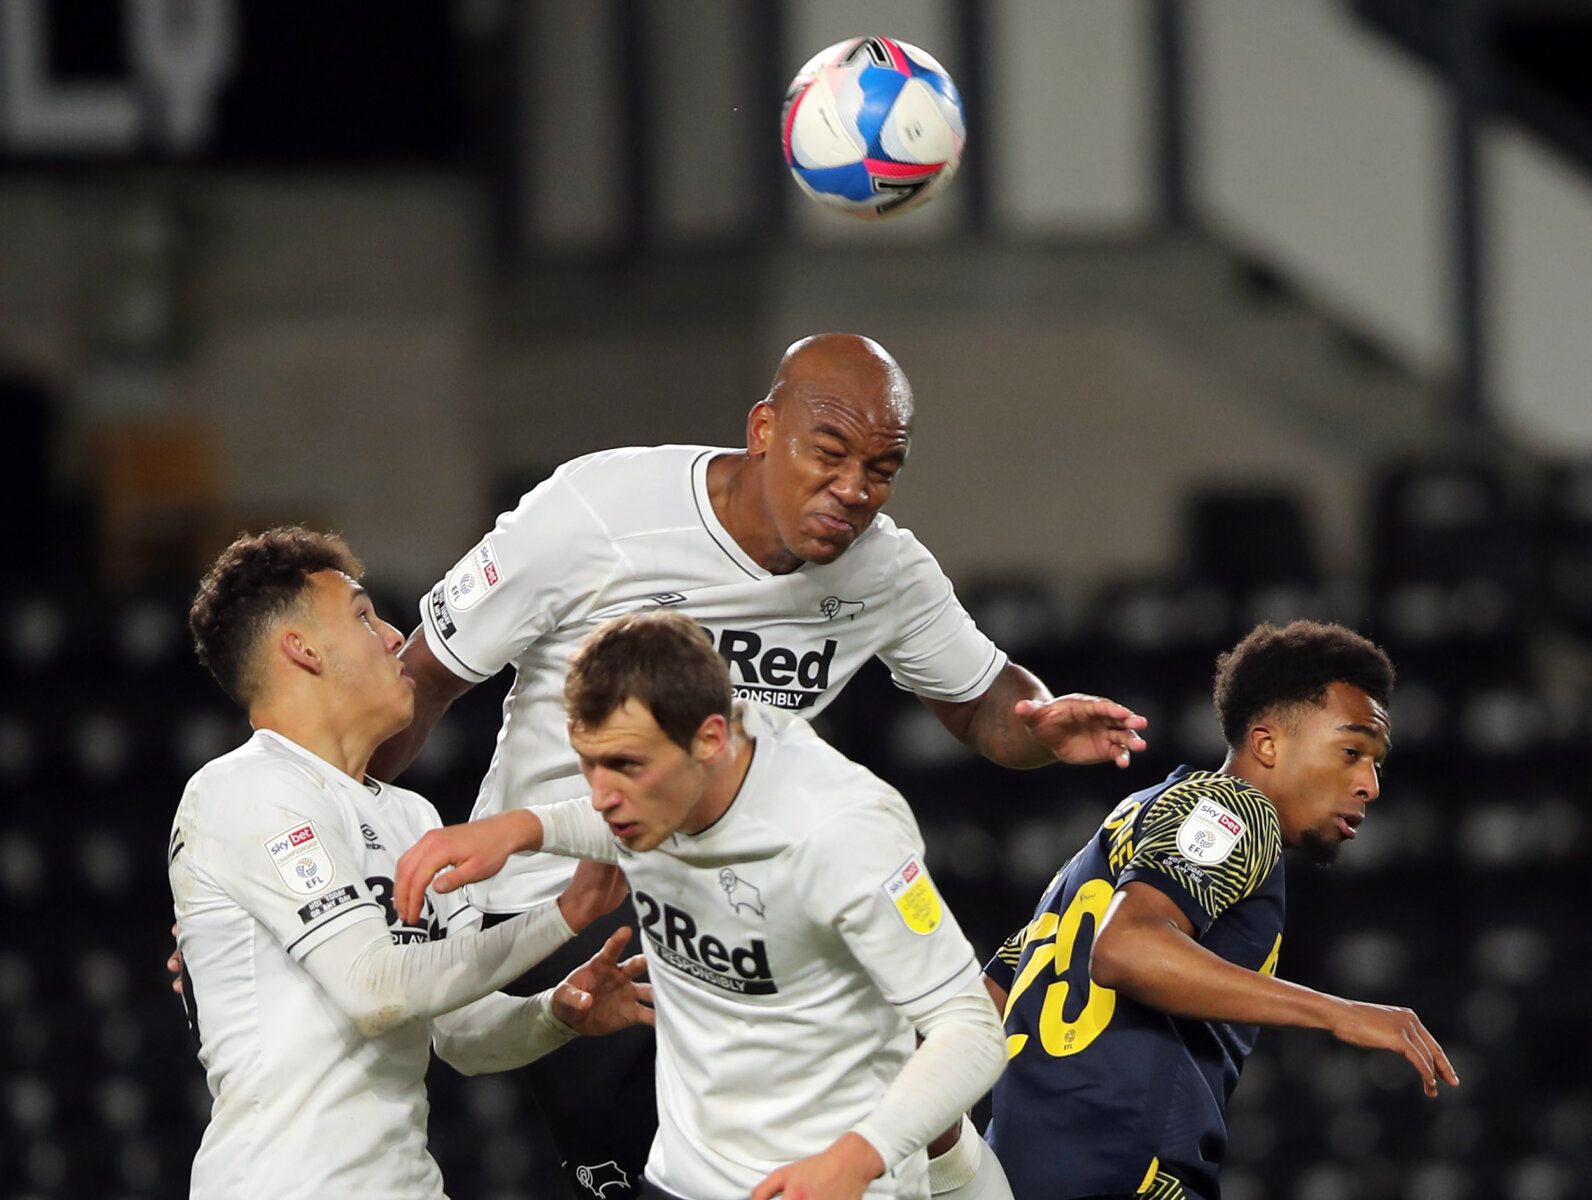 Soccer Football - Championship - Derby County v Stoke City - Pride Park, Derby, Britain - December 12, 2020 Derby County's Andre Wisdom in action Action Images/Molly Darlington EDITORIAL USE ONLY. No use with unauthorized audio, video, data, fixture lists, club/league logos or 'live' services. Online in-match use limited to 75 images, no video emulation. No use in betting, games or single club /league/player publications.  Please contact your account representative for further details.